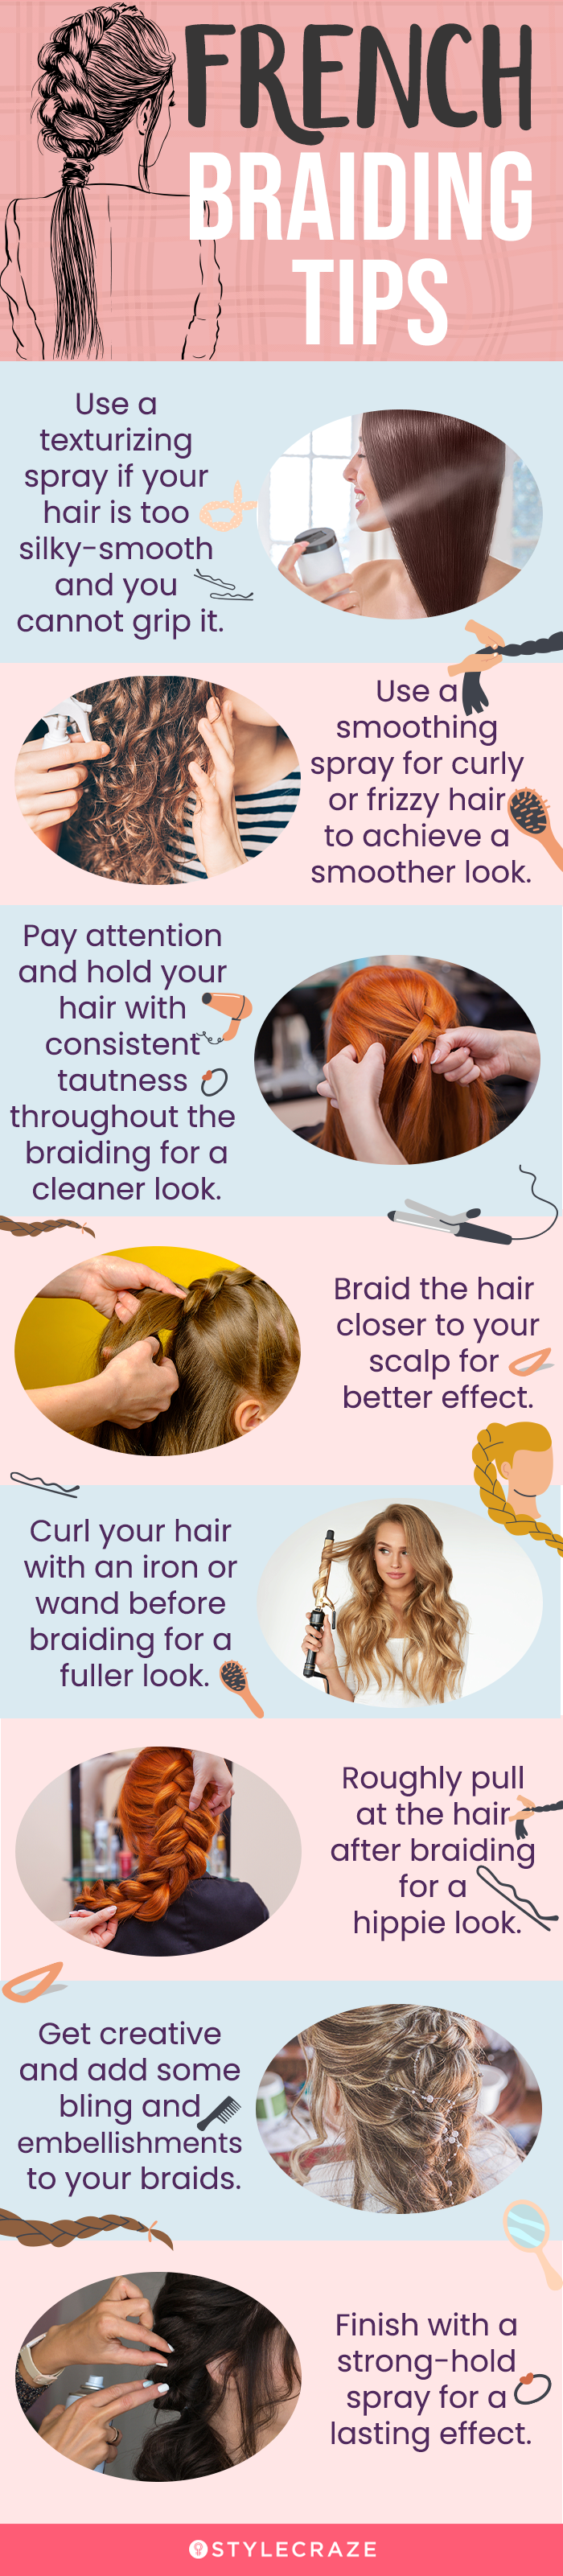 french braiding tips (infographic)